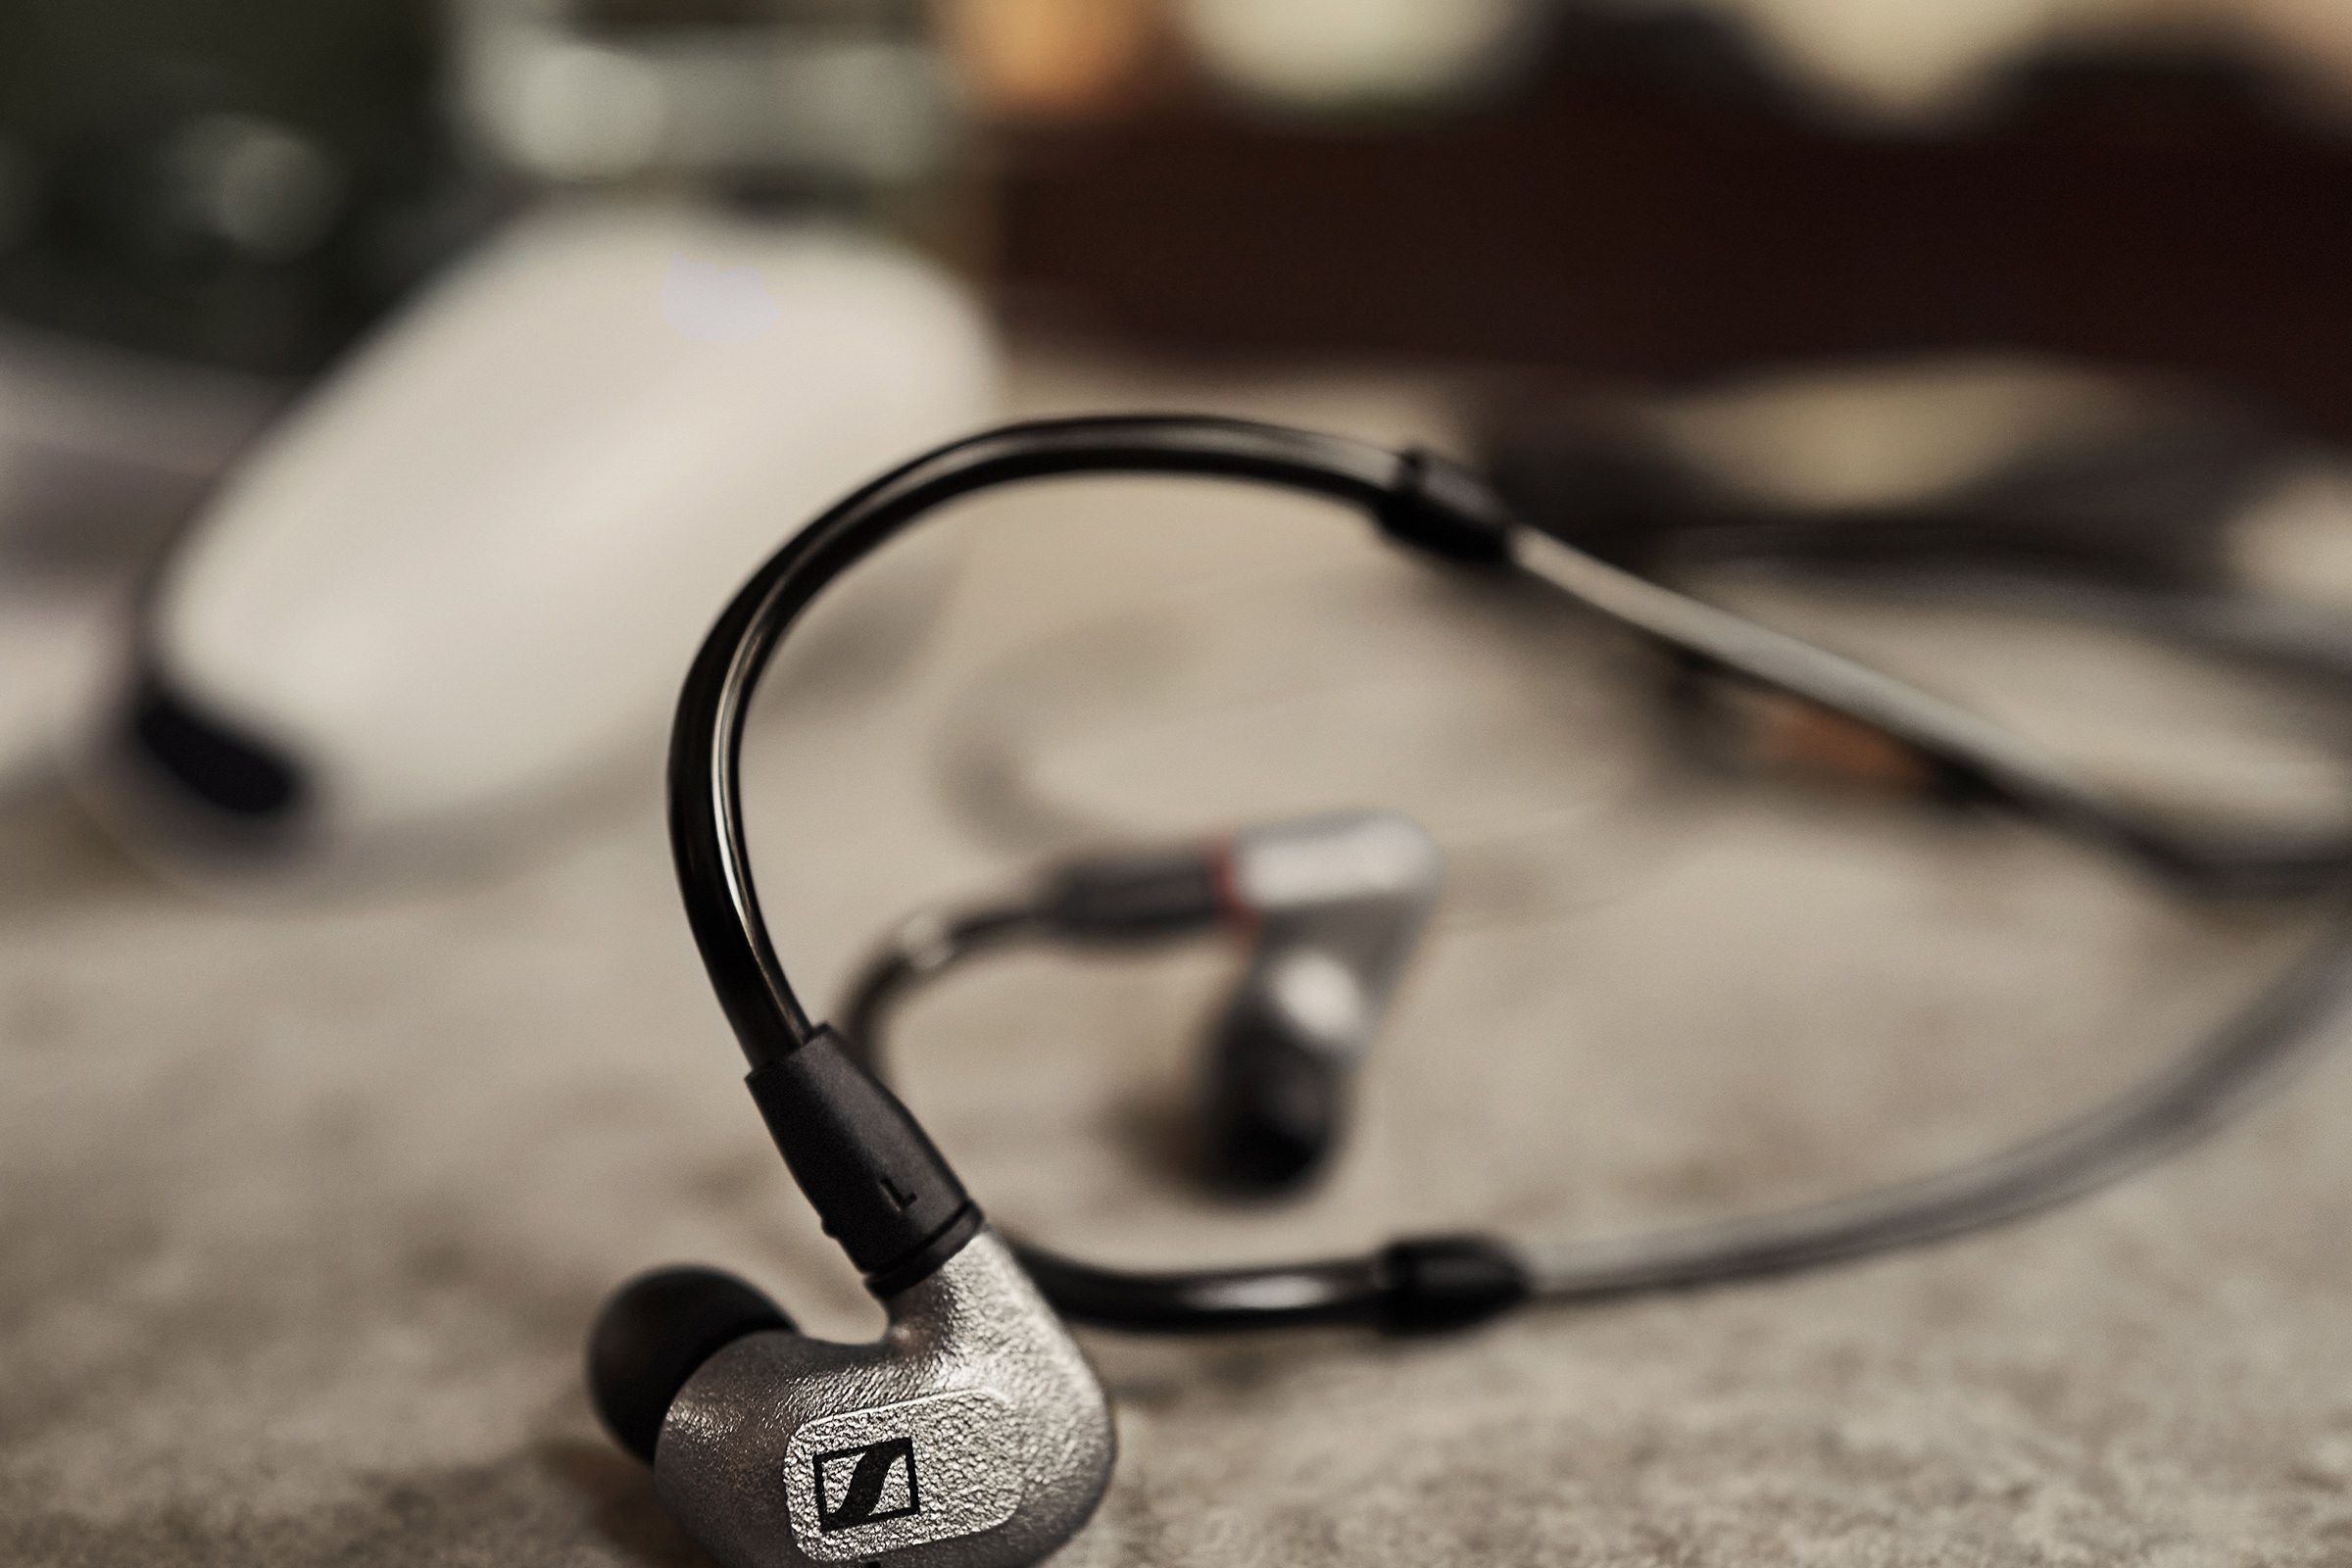 Zirconium is a key part of the IE 600 earbuds.